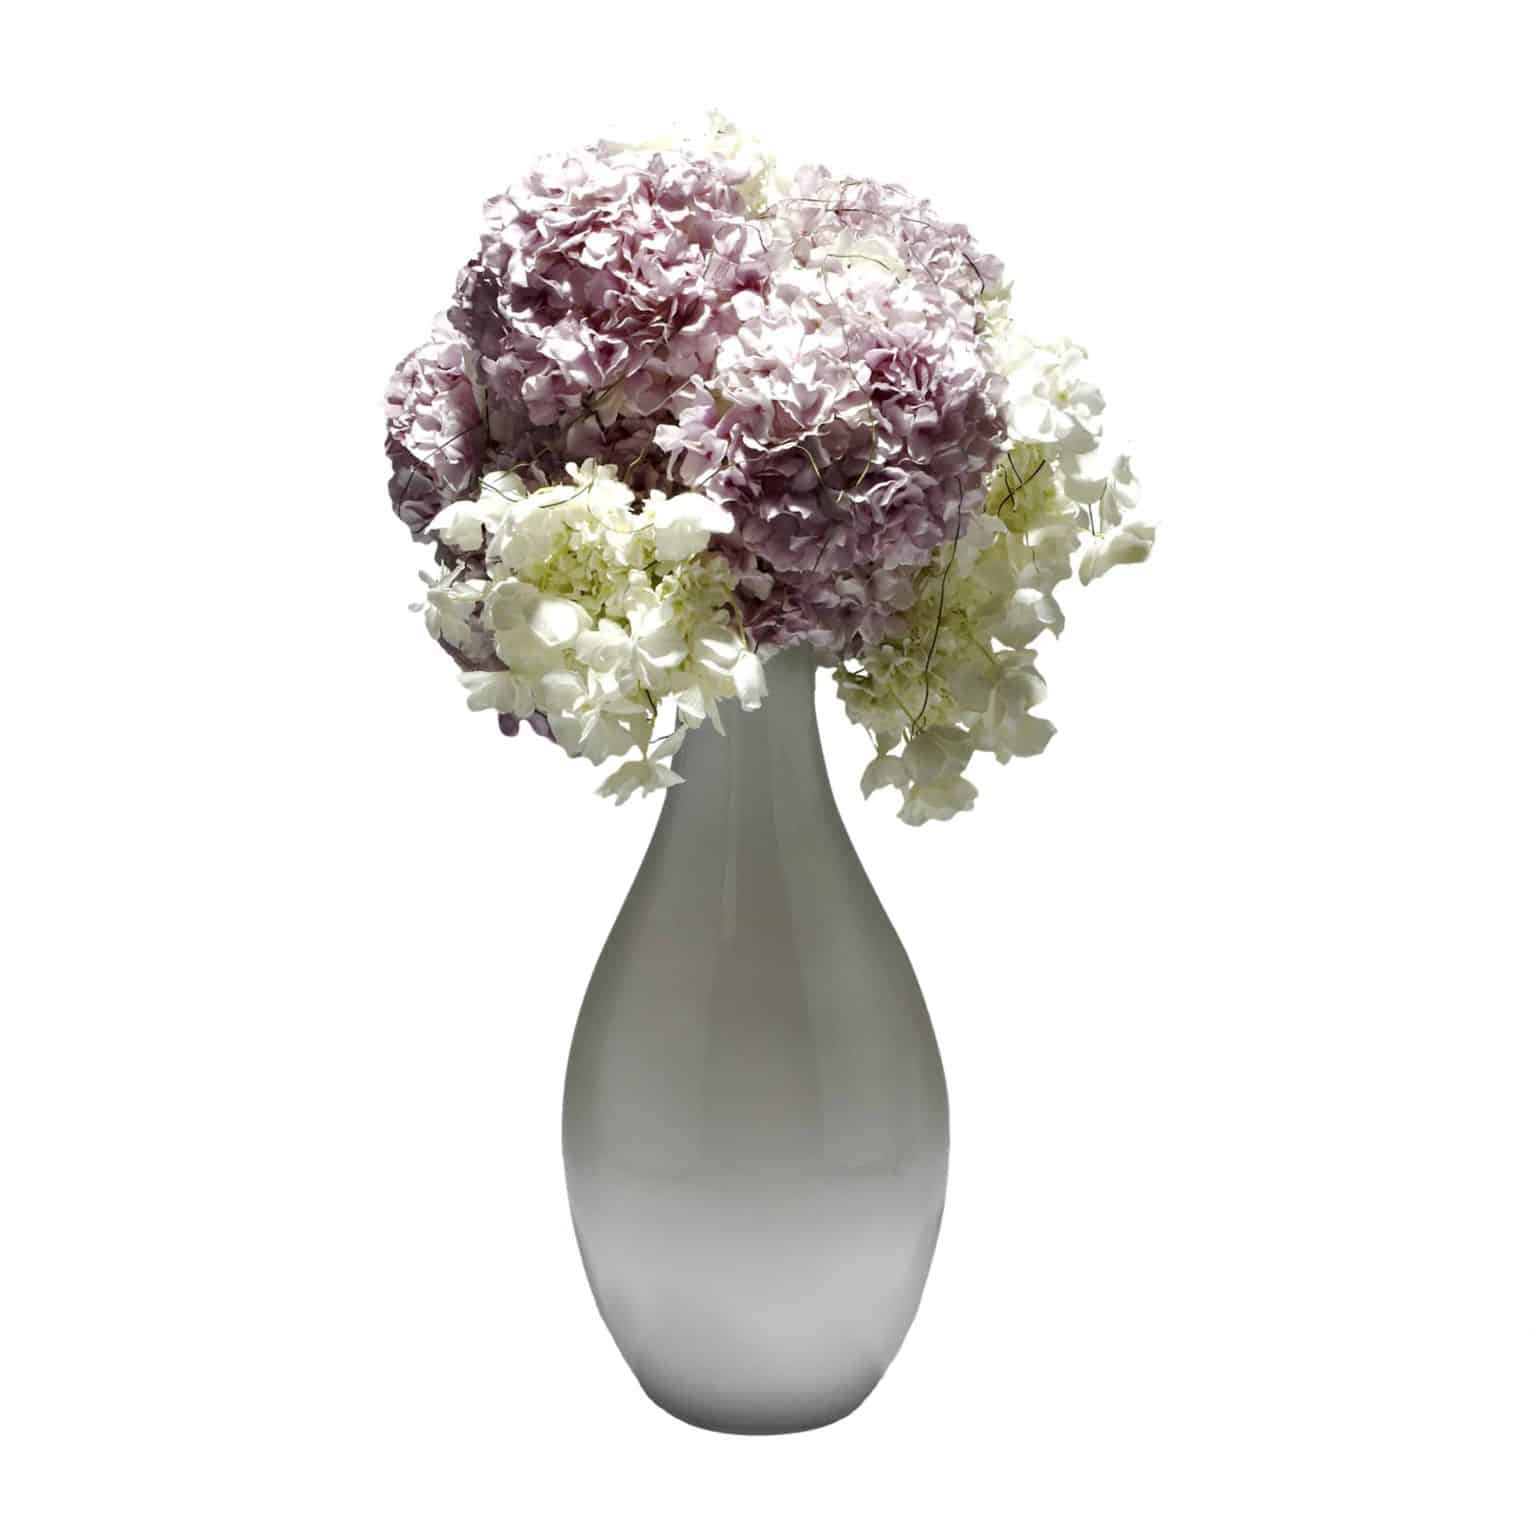 Shop for our beautiful pink & white butterfly hydrangea arrangement. Designed in dome and arranged in a white vase for a chic modern look.